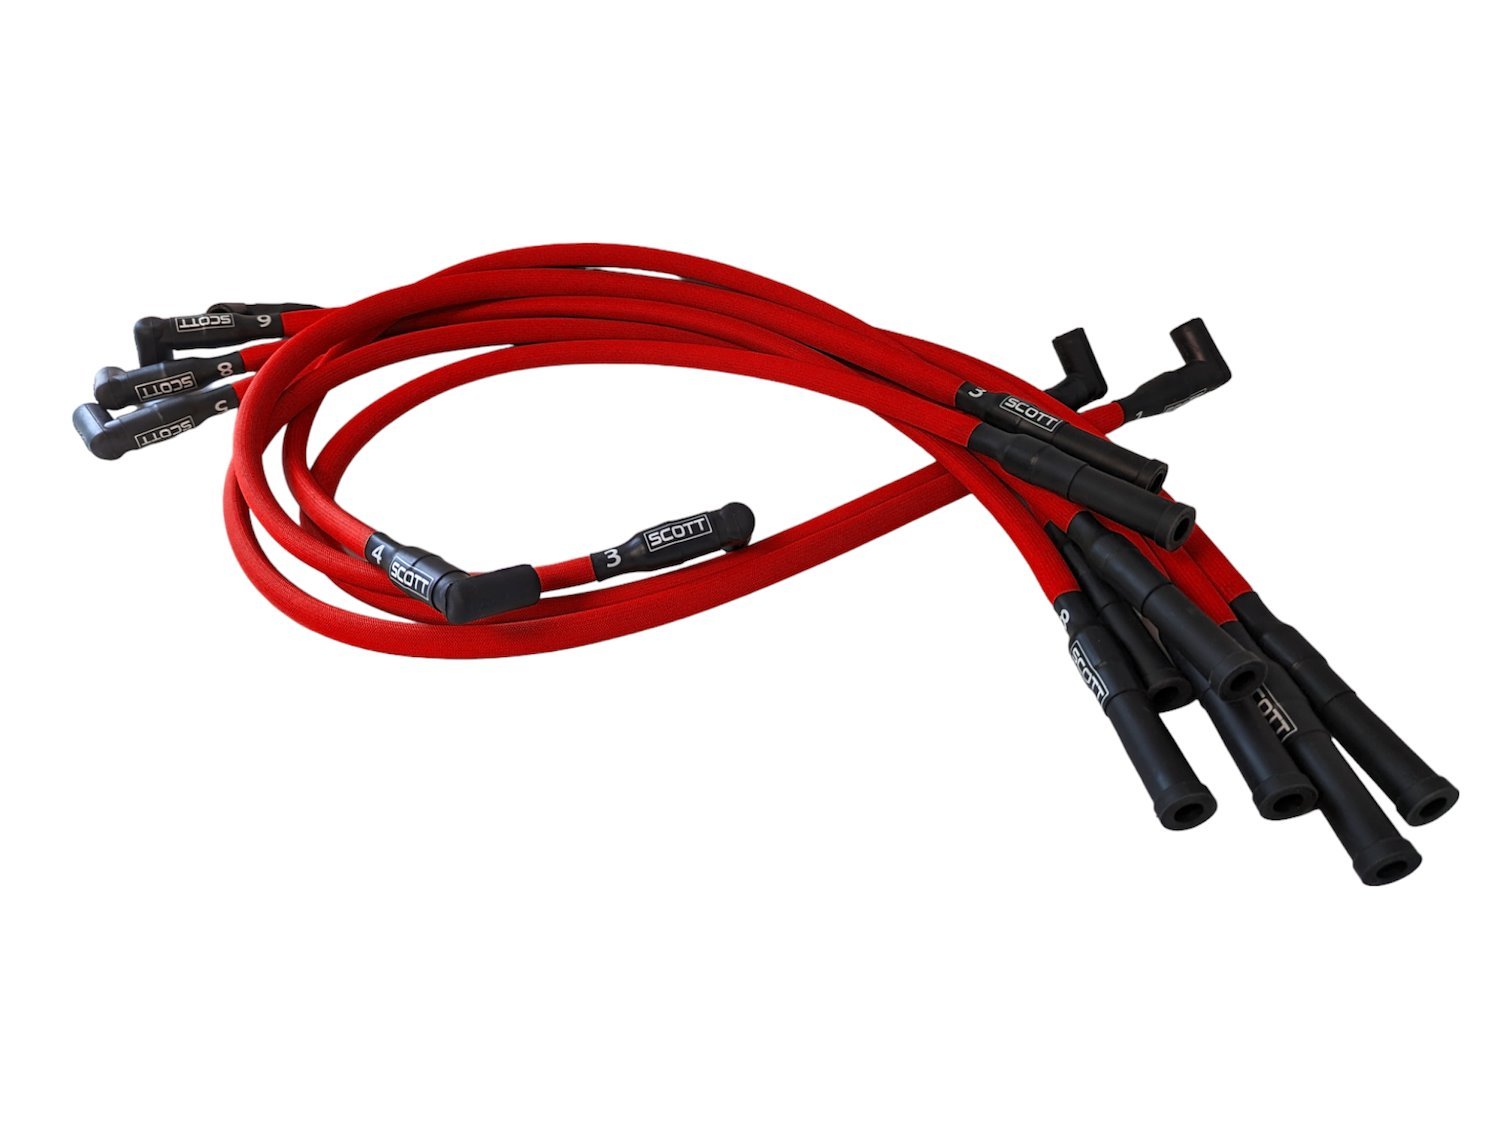 SPW-PS-660-2 High-Performance Fiberglass-Oversleeved Spark Plug Wire Set for Small Block Dodge [Red]